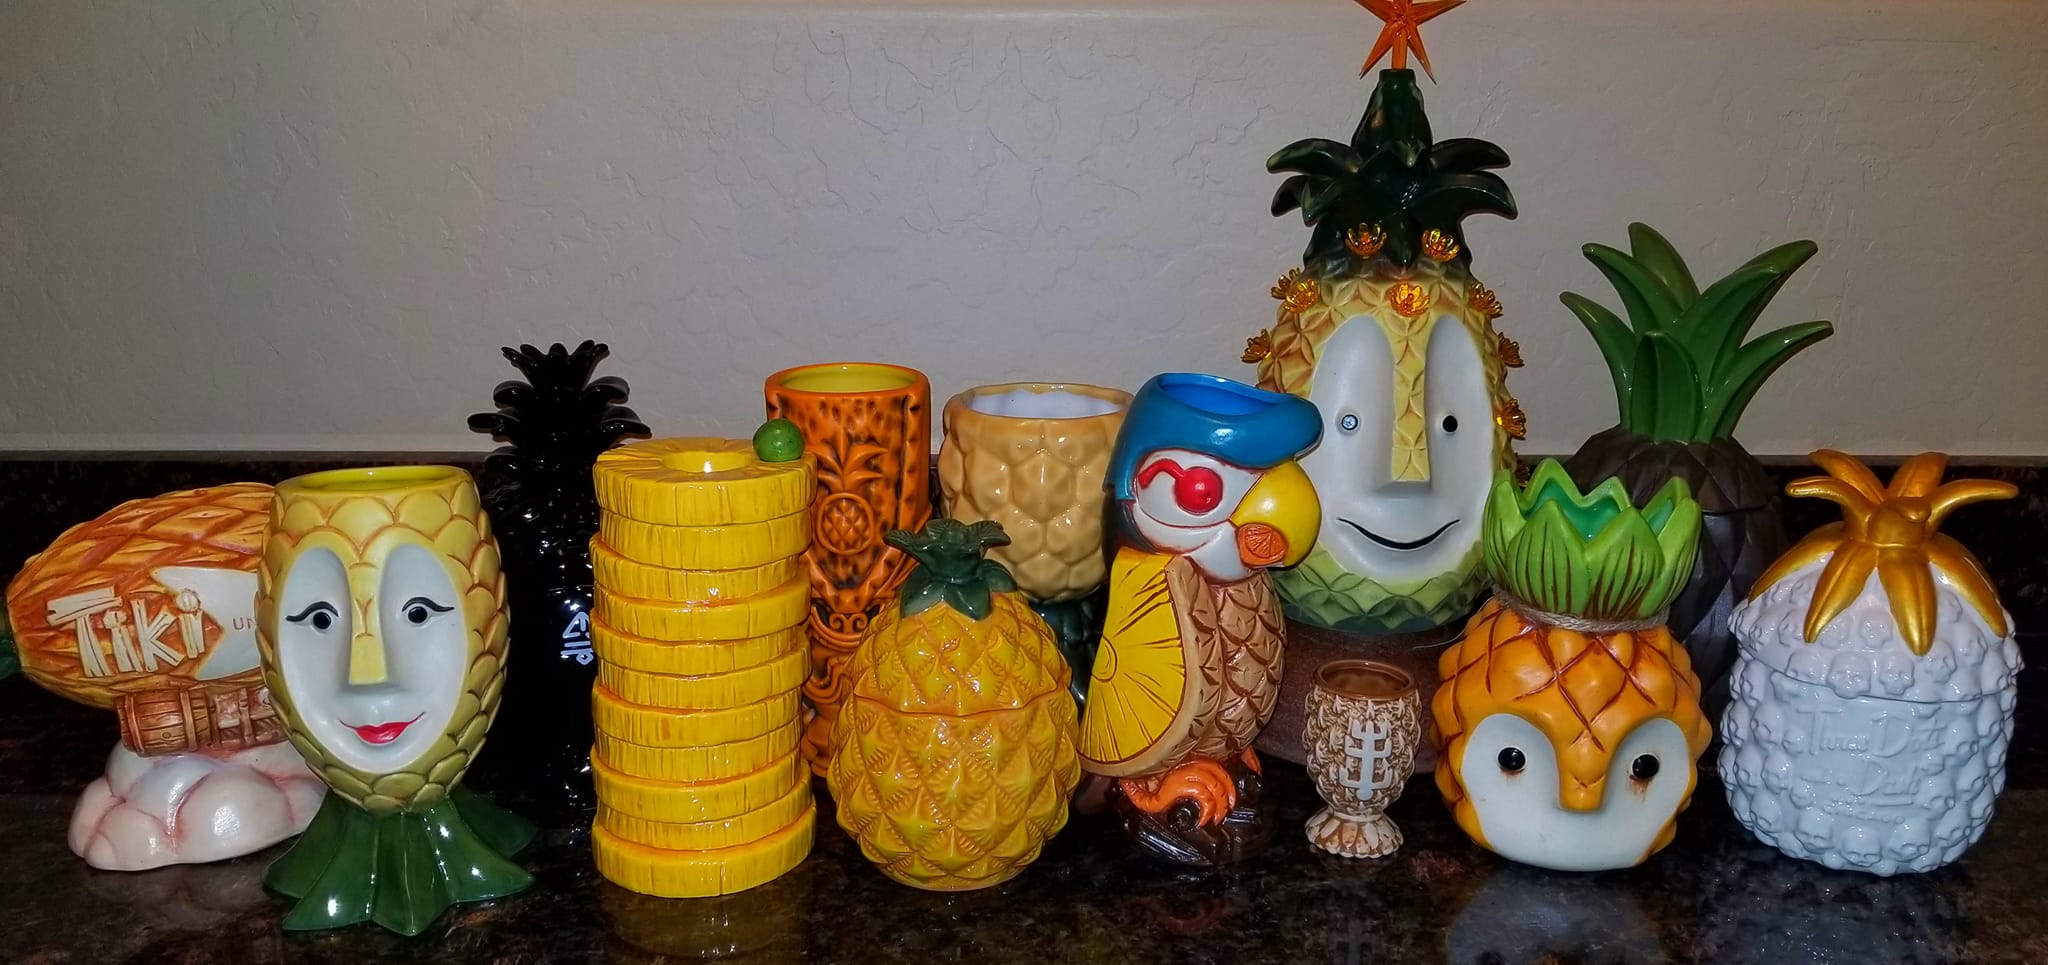 a group of pineapple figurines and stacks of coins